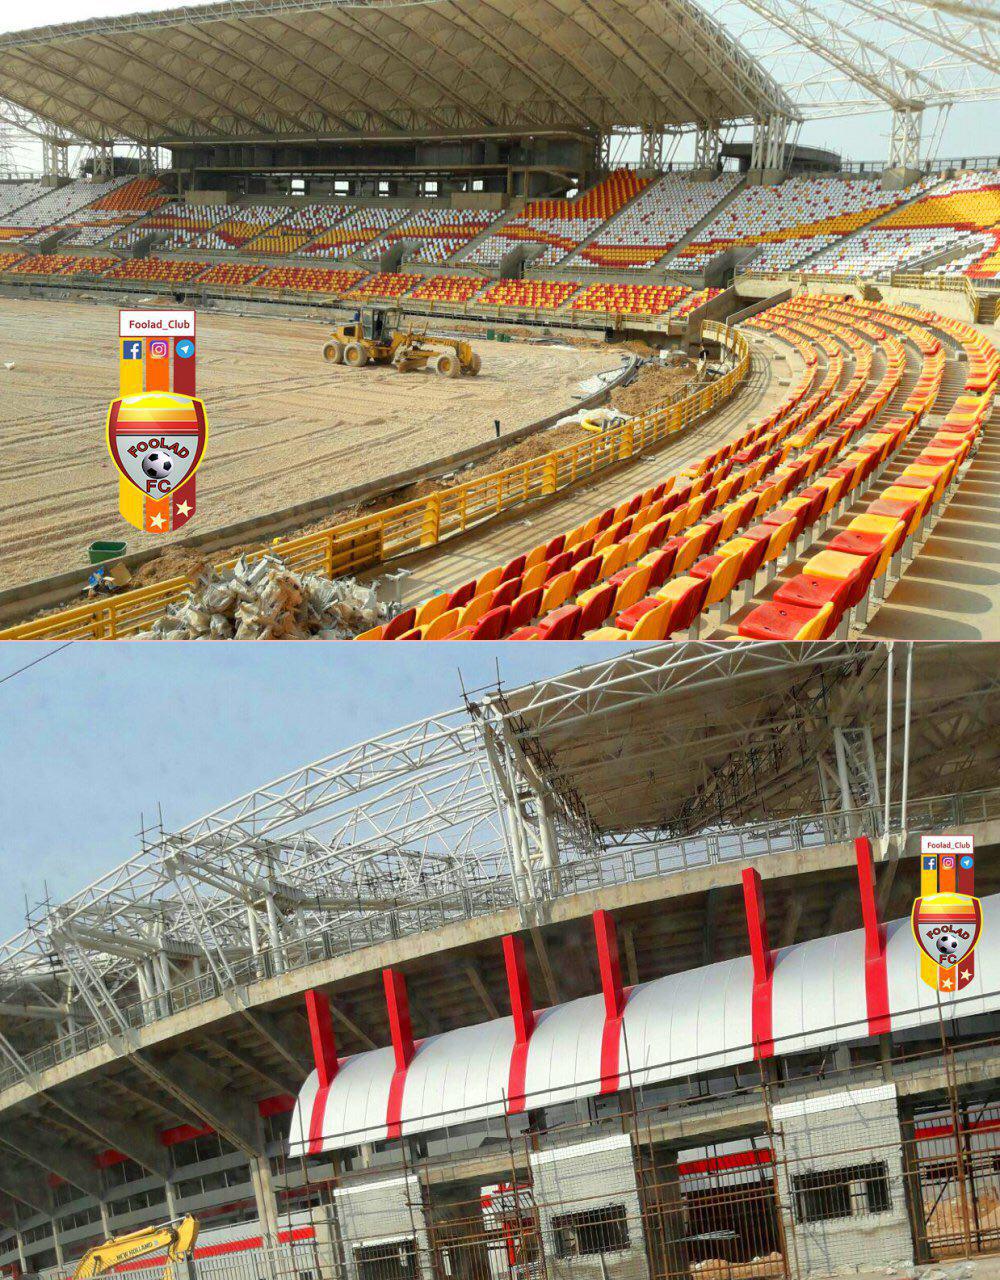 The Khuzestan steelmaking stadium will be opened at the first vice president`s visit to Khuzestan